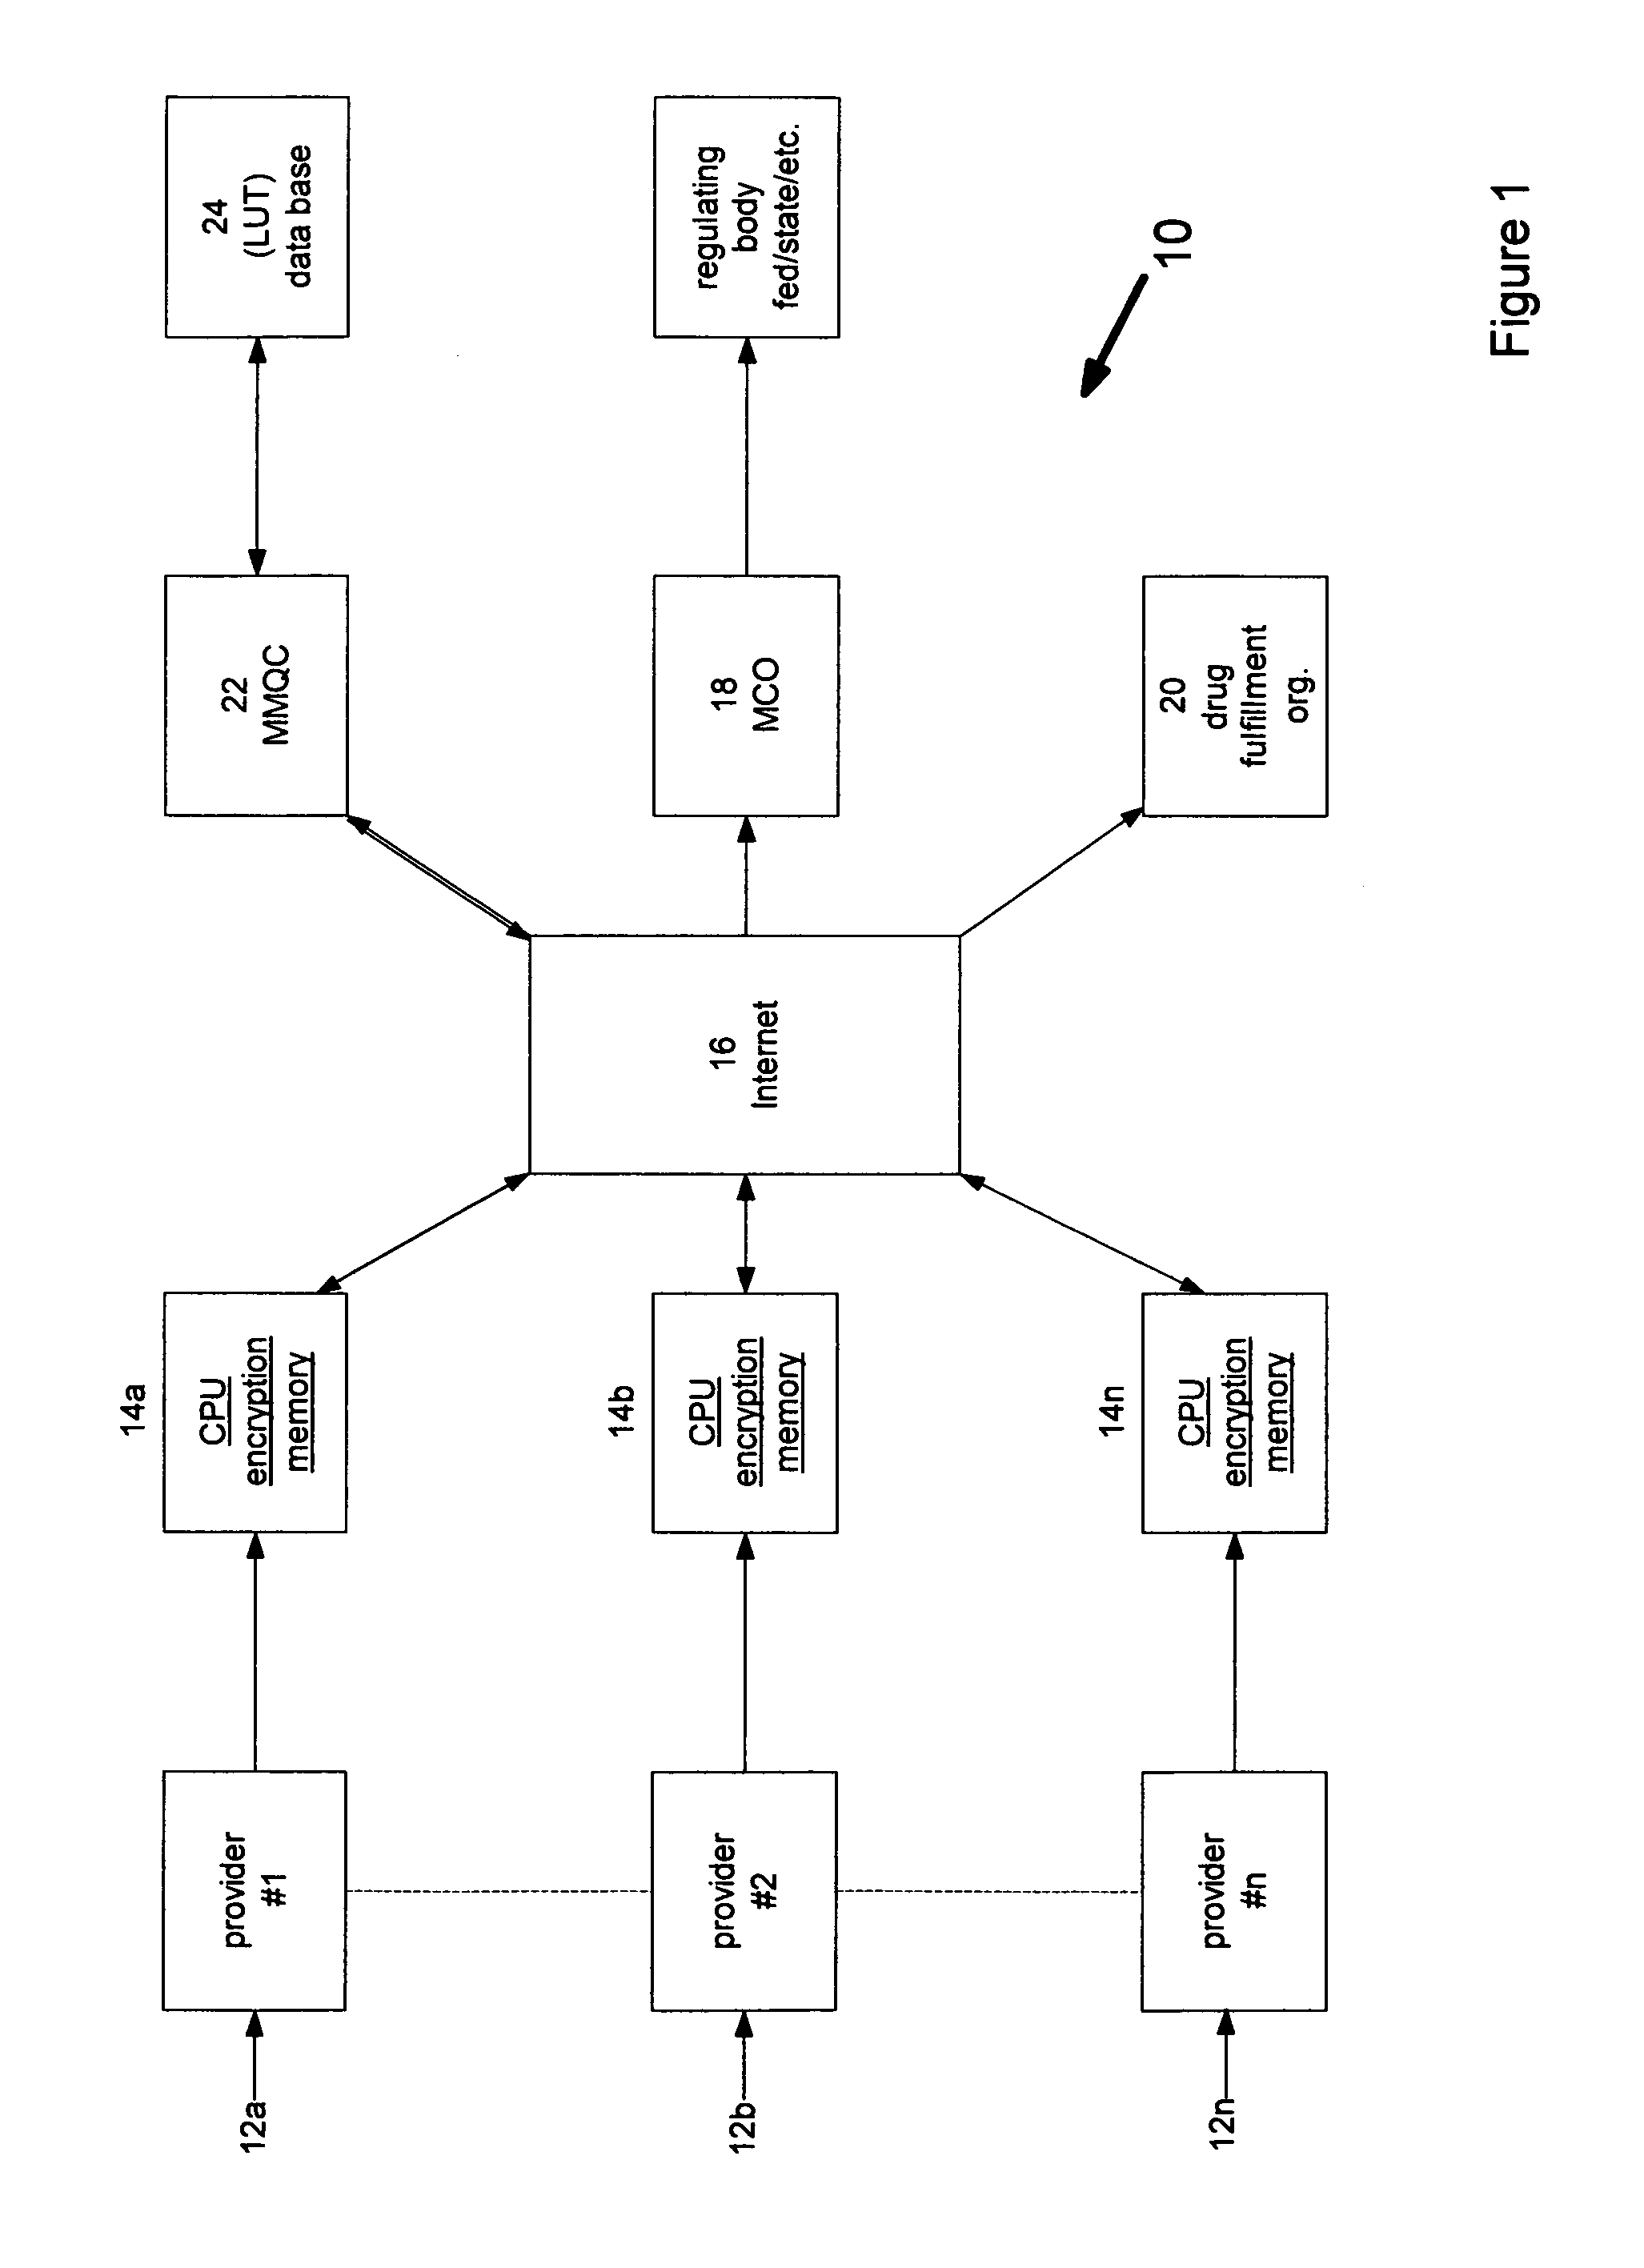 System for and method of enhancing patient's healthcare by utilizing provider-generated data